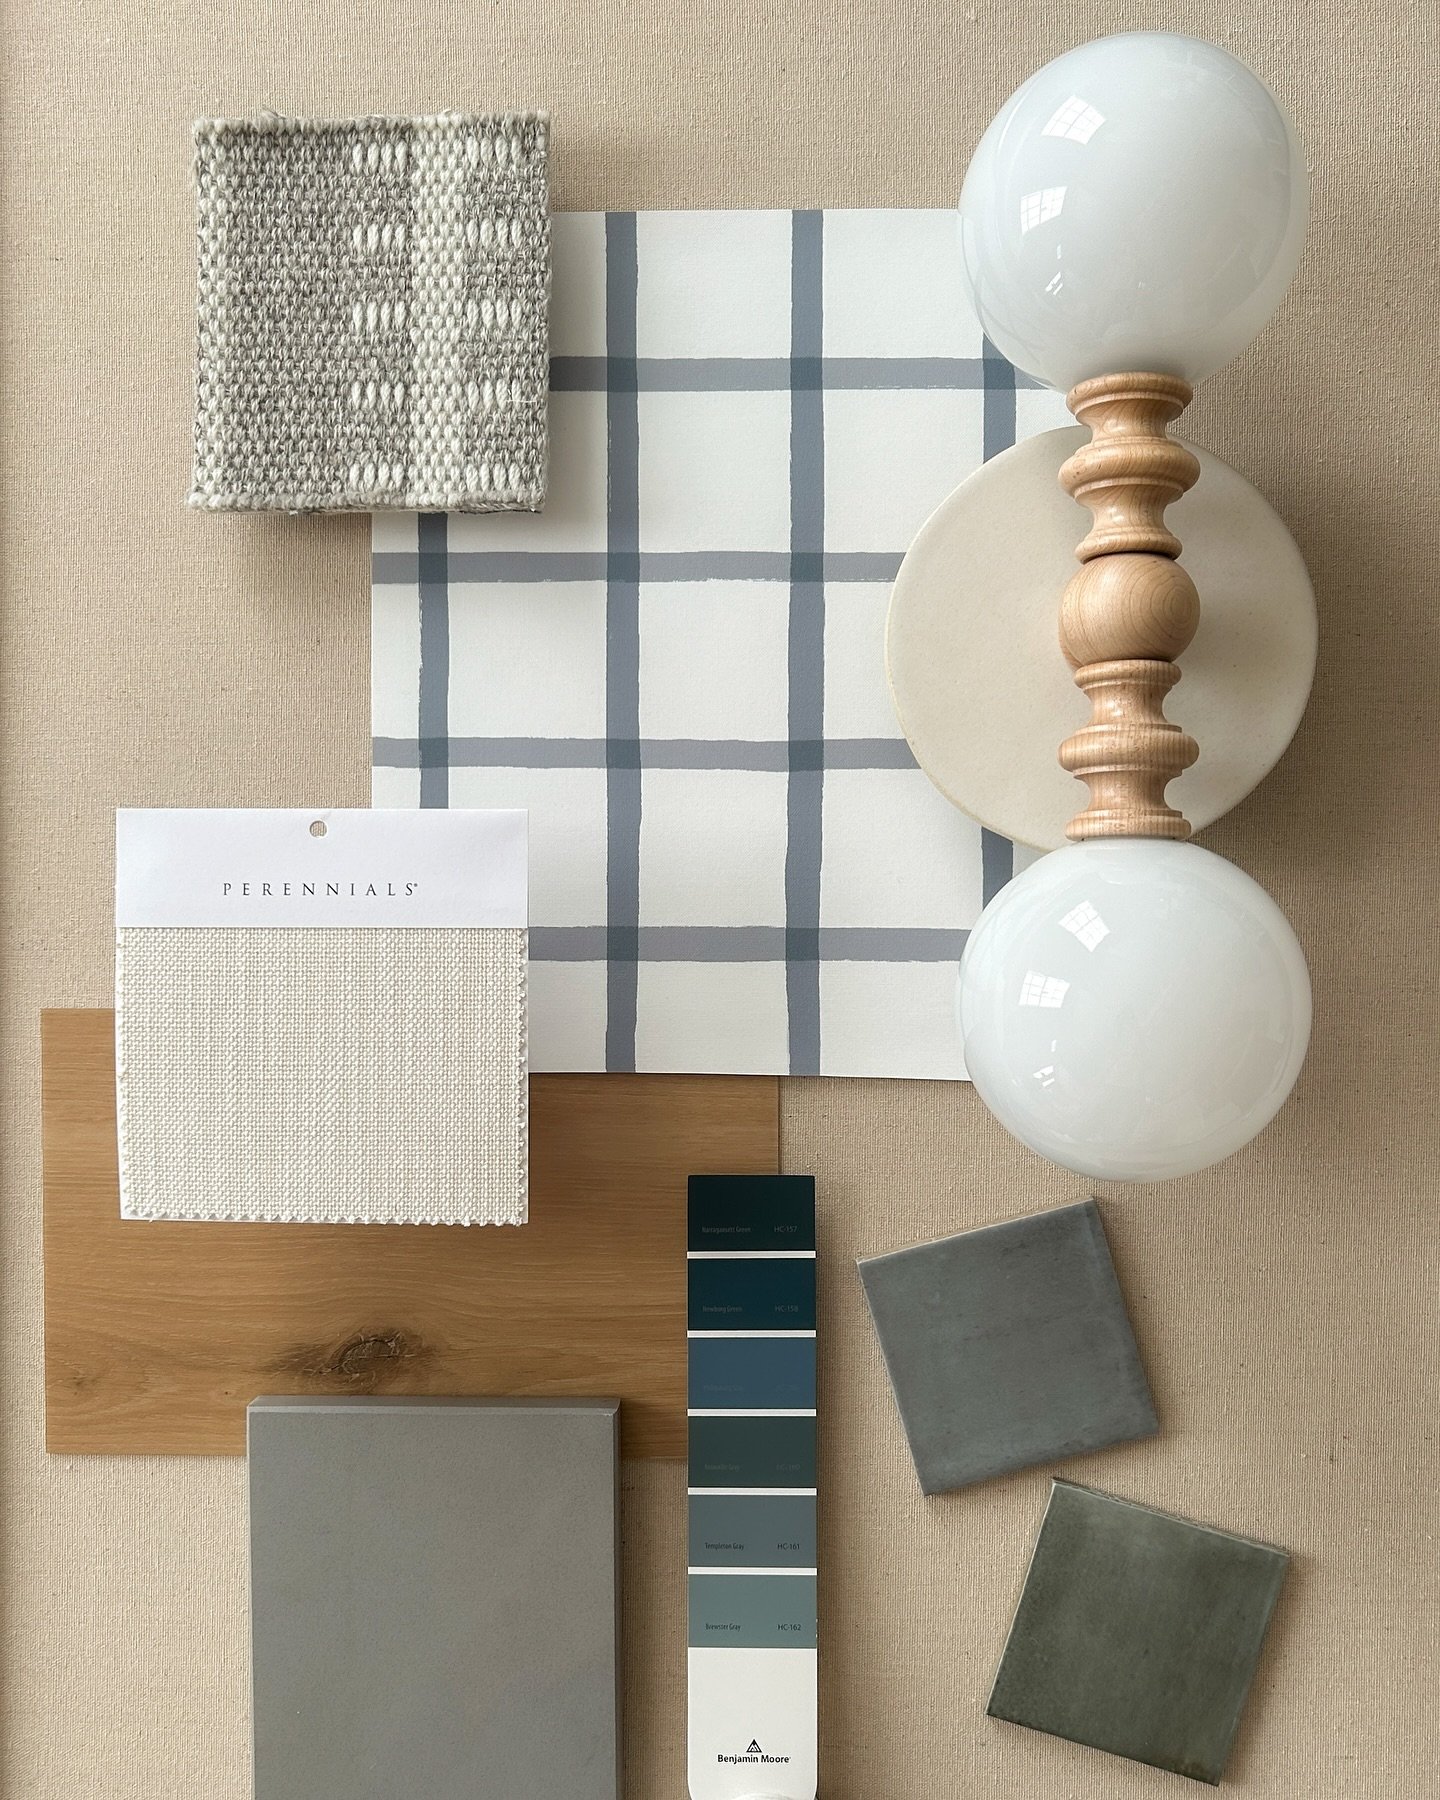 A sampling of materials selected for a reimagined family home. Design concepts for this project merge playful fixtures with timeless (&amp; durable) finishes that will grow with 3 young brothers. We feel so lucky to shape spaces where memories will b